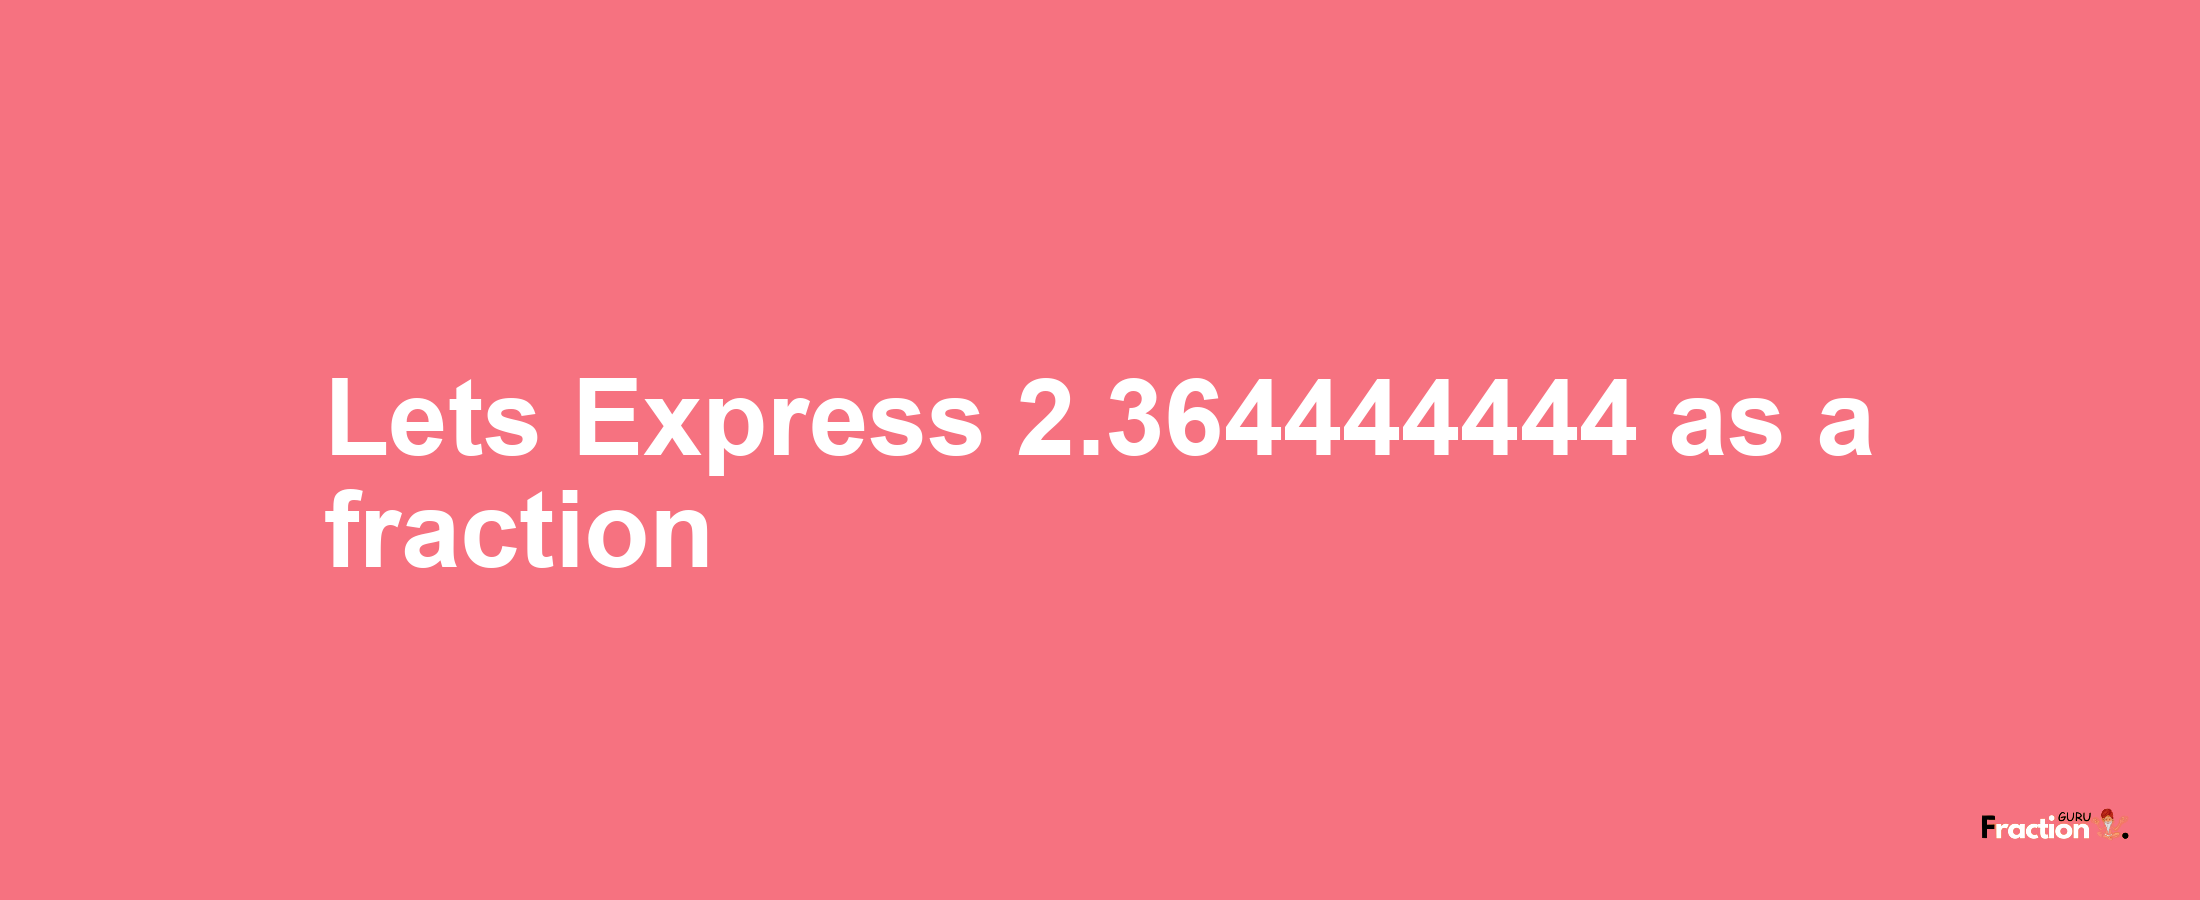 Lets Express 2.364444444 as afraction